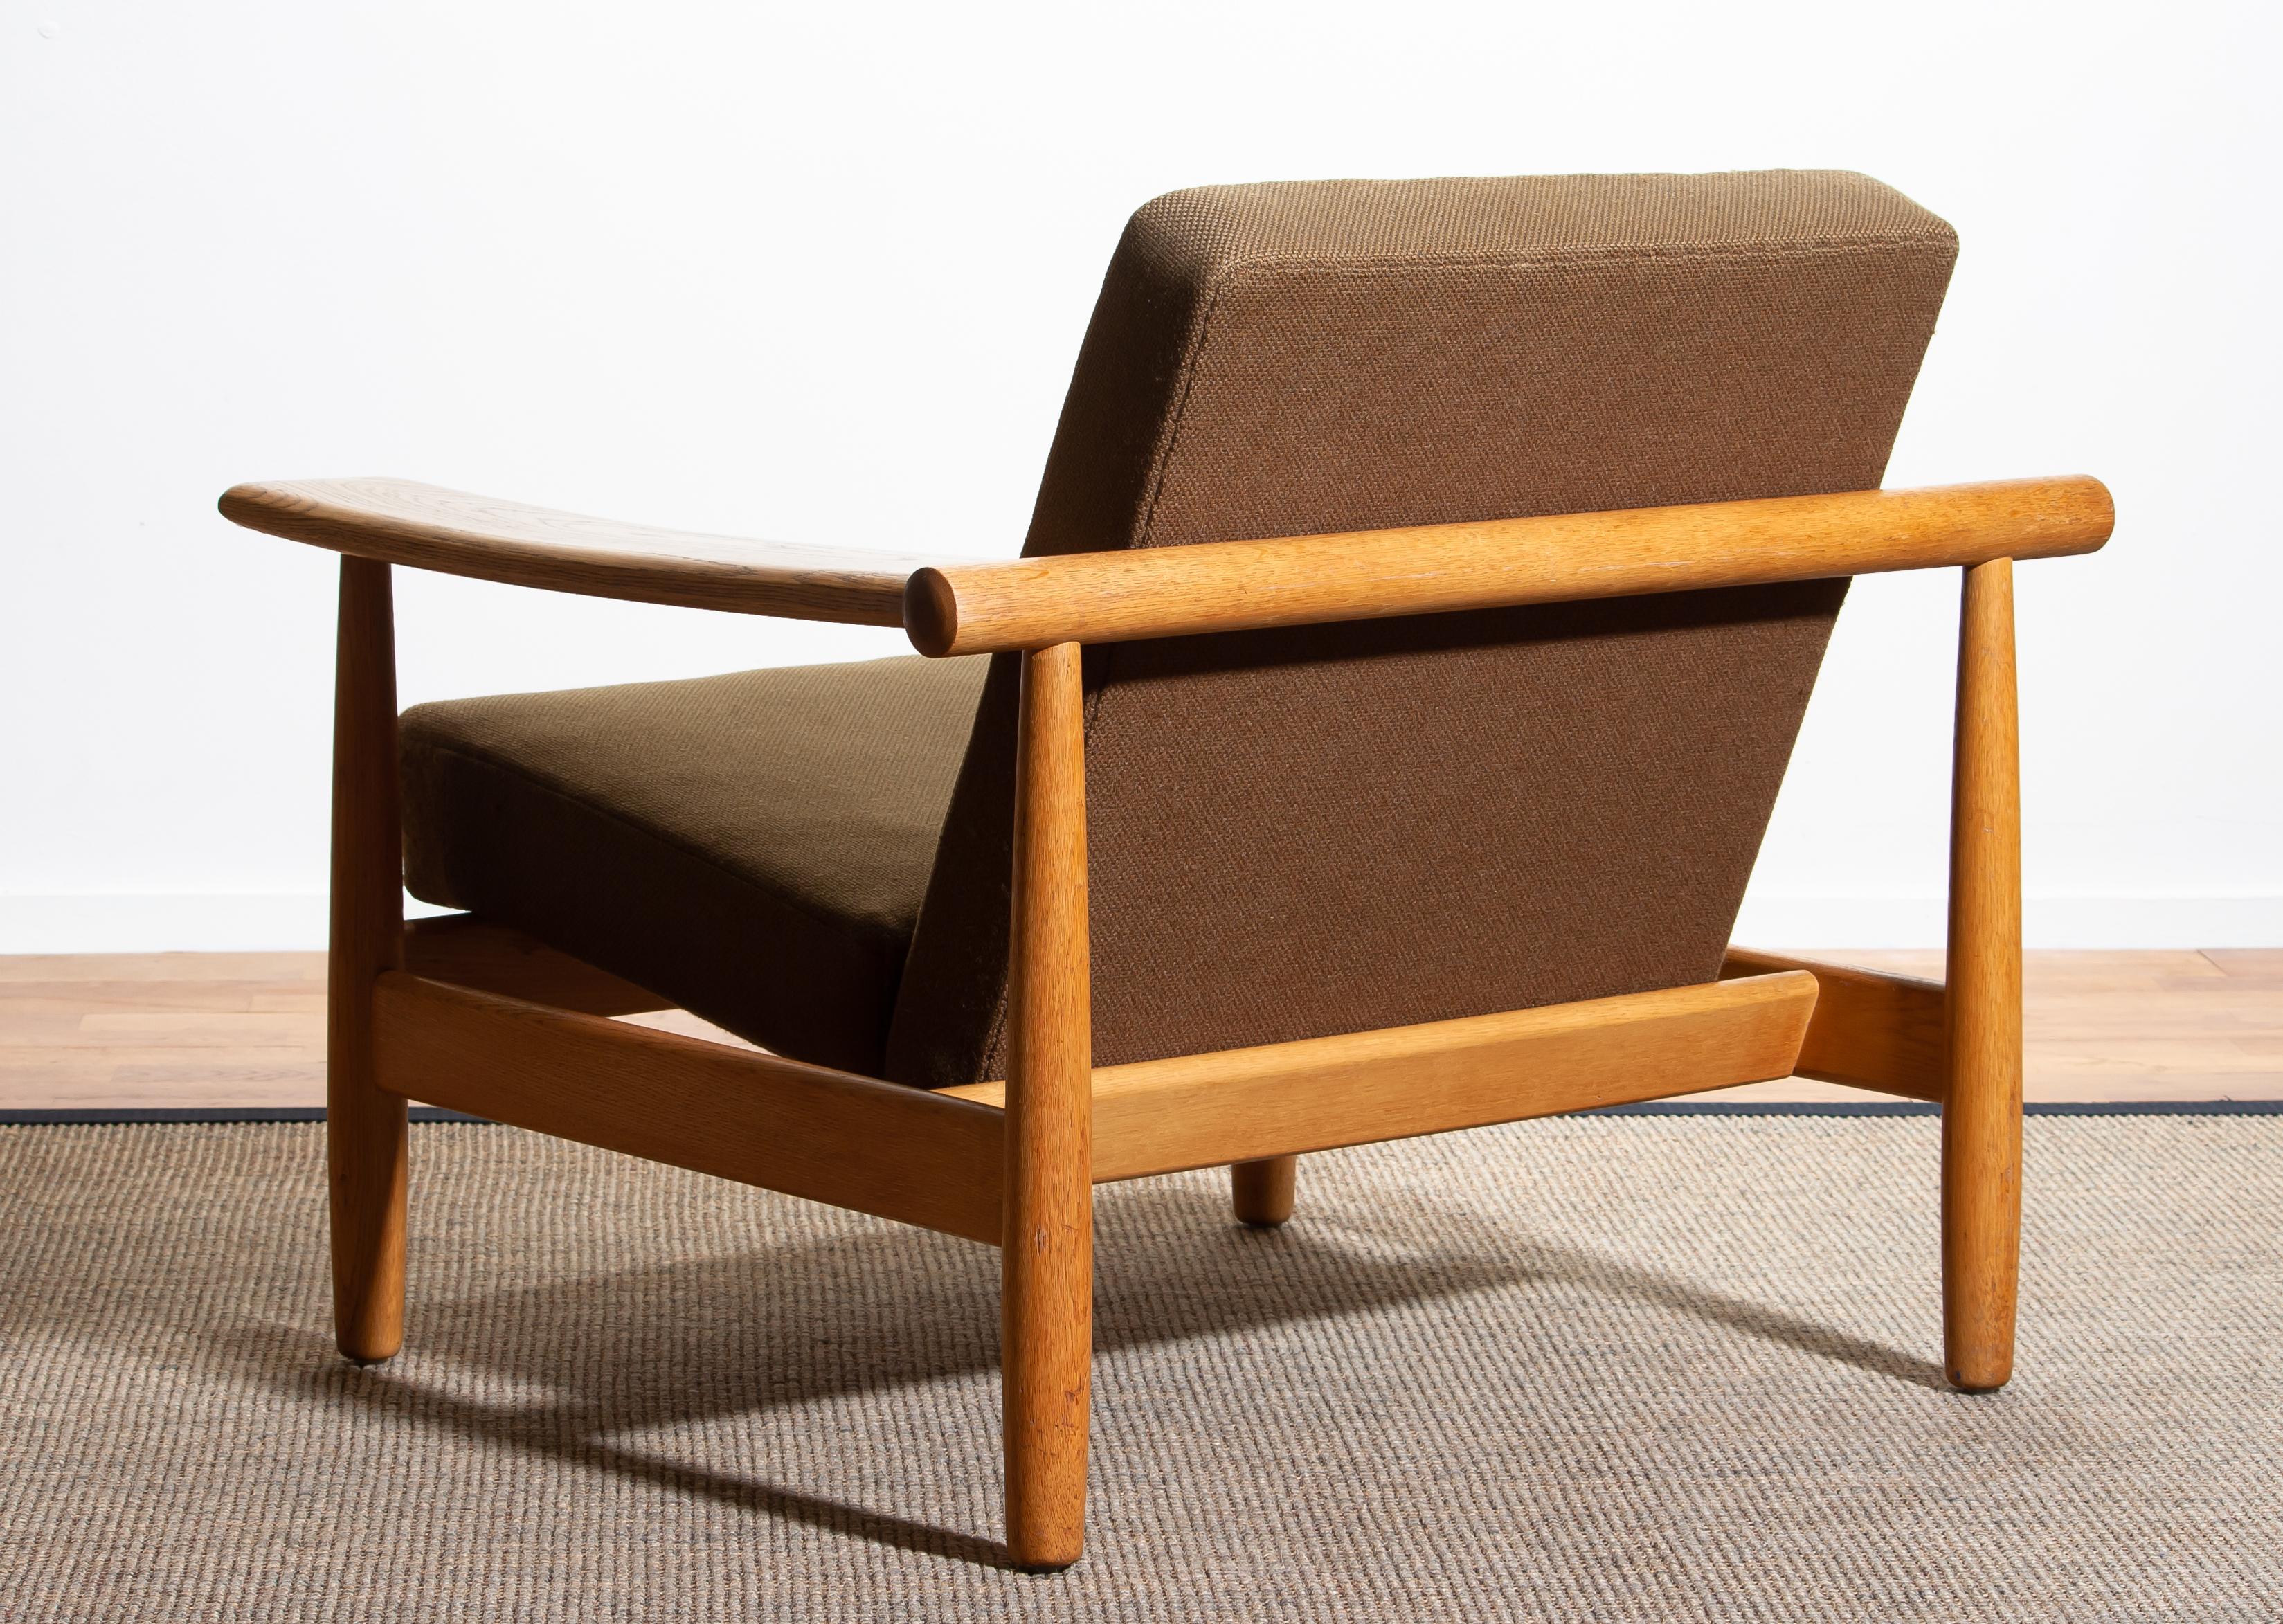 1960s, Oak Sofa and Lounge Chair or Living Room Set from Denmark 4